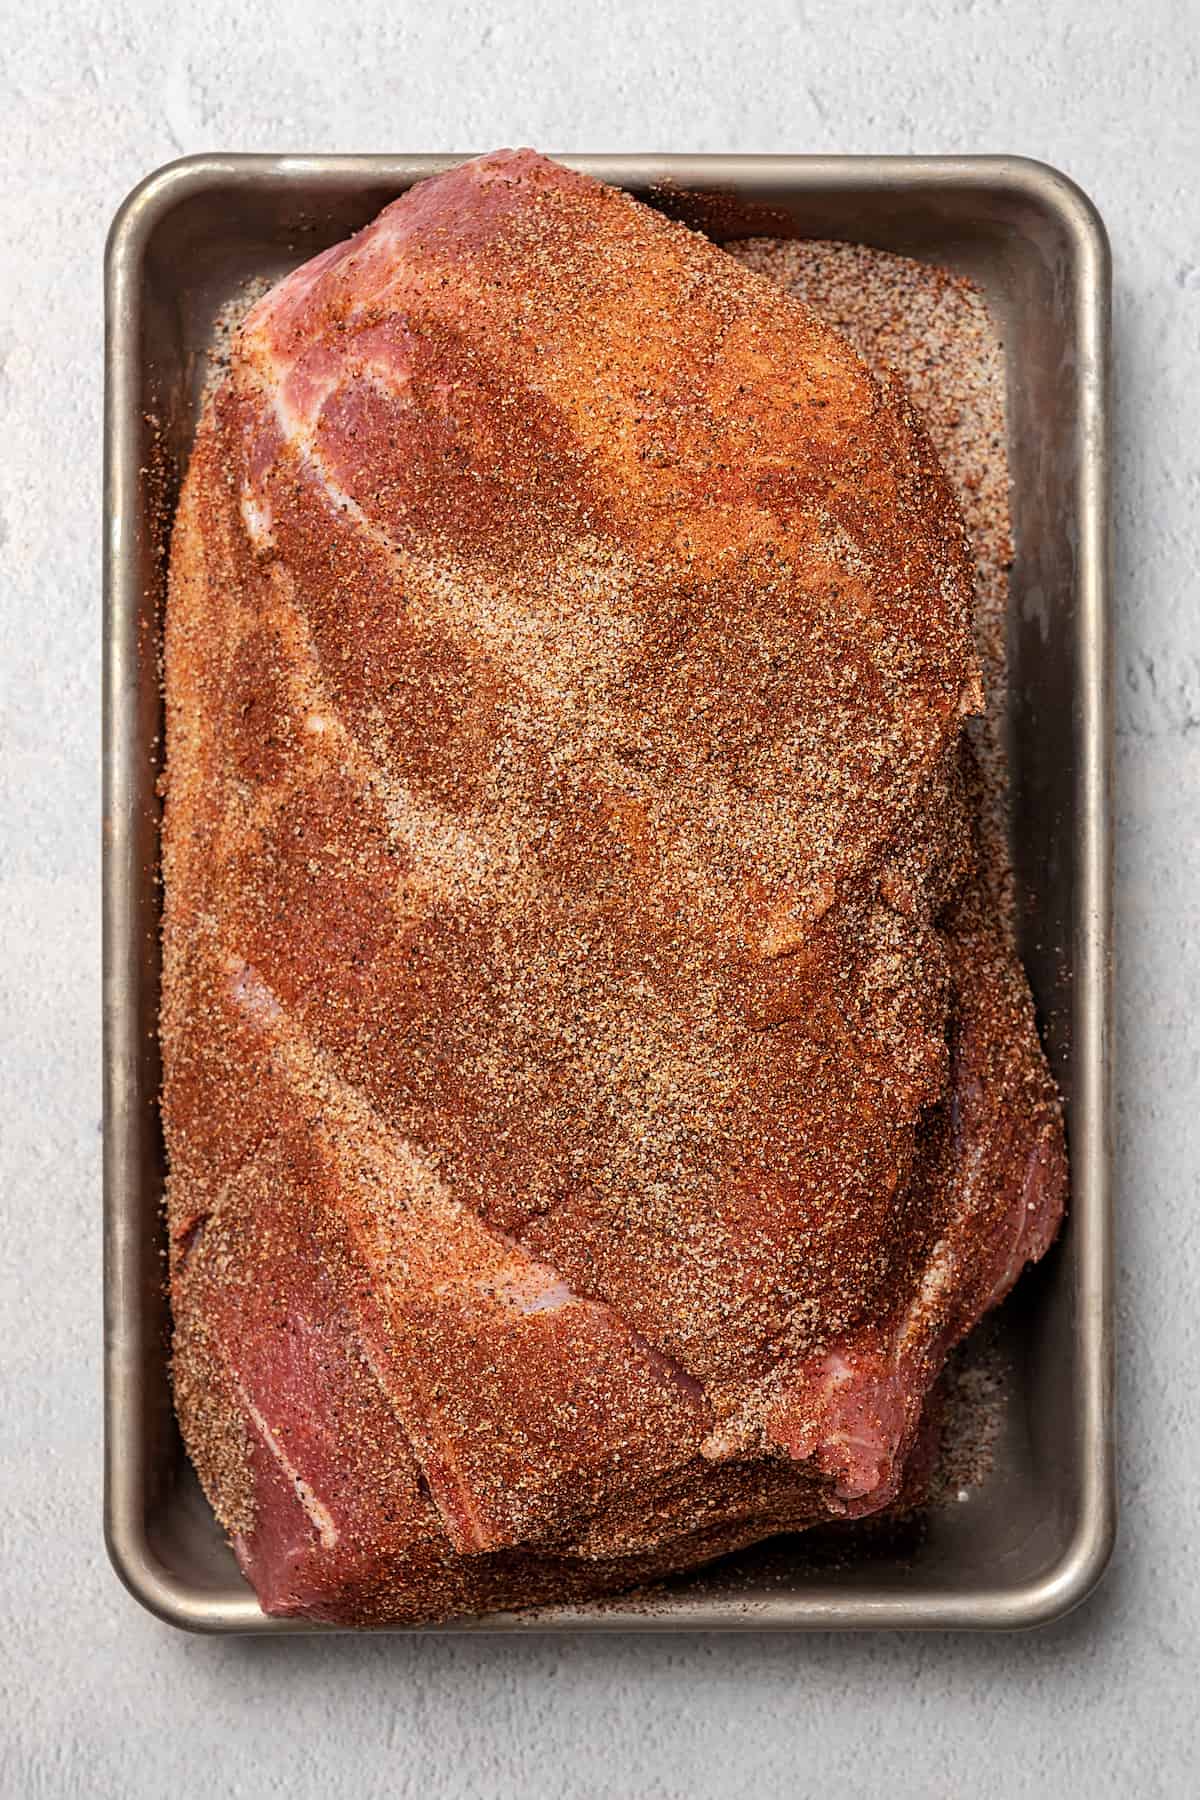 A large pork shoulder, rubbed with spices.